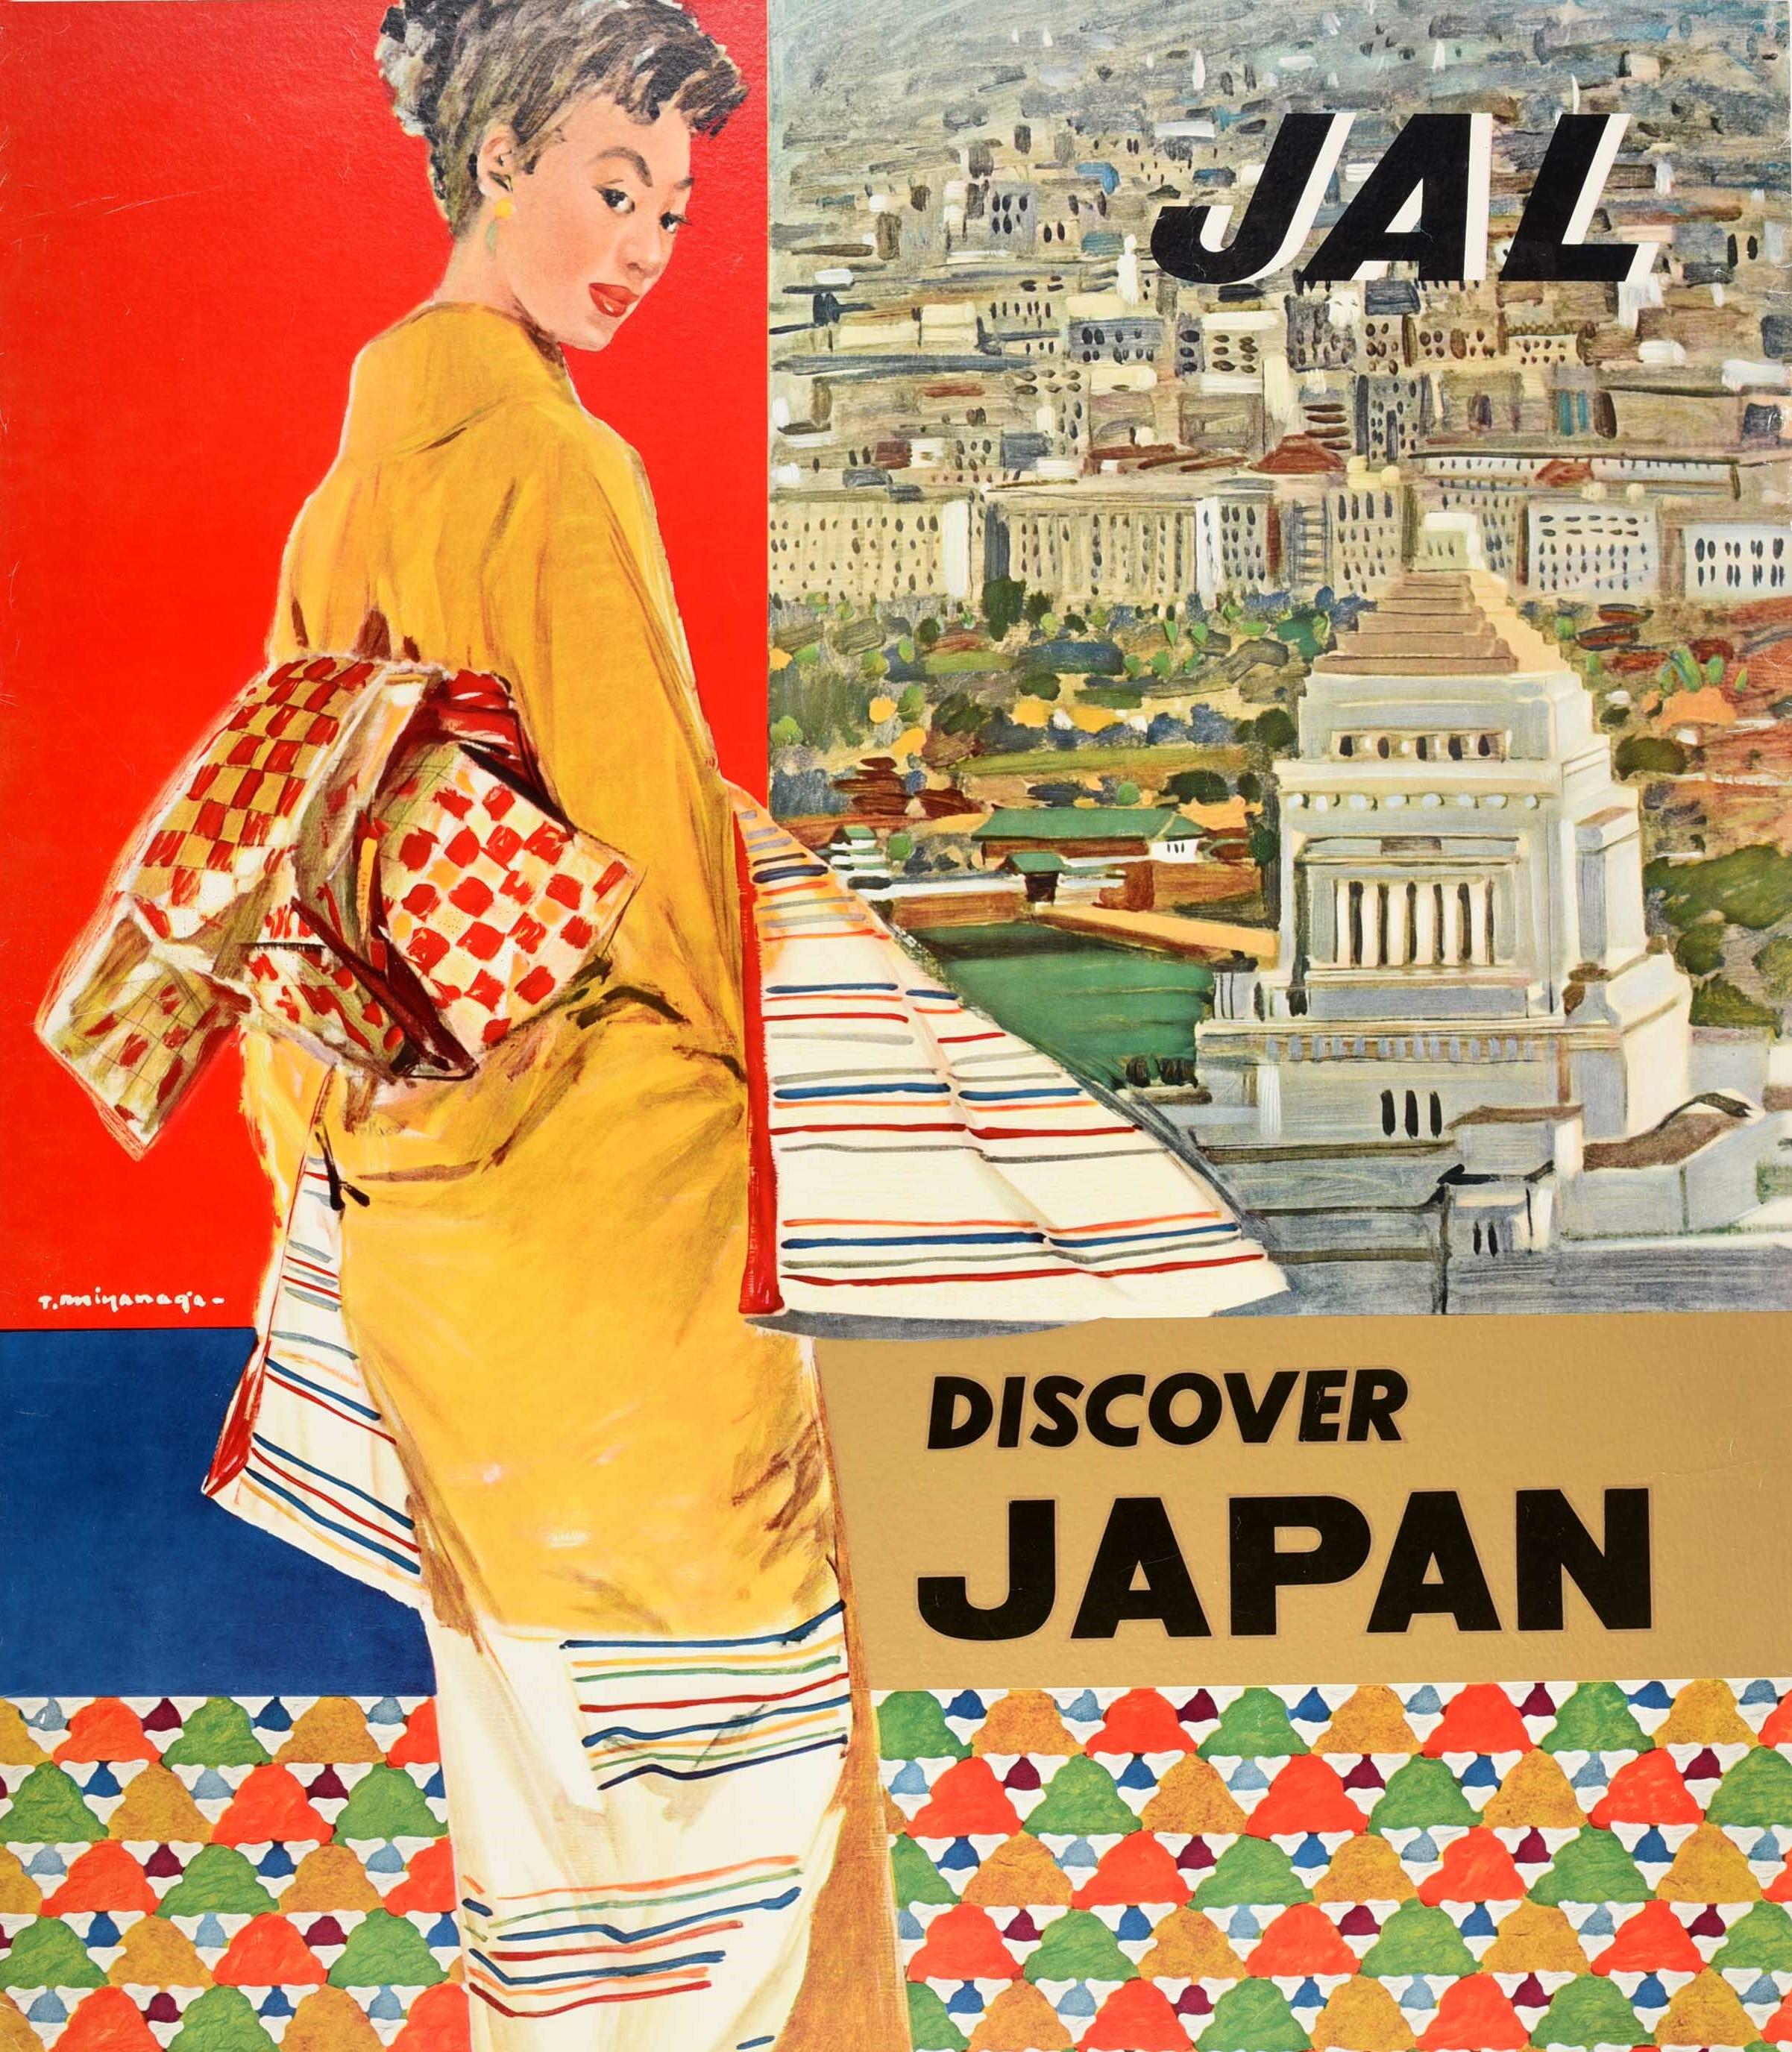 Original Vintage Travel Poster Discover Japan Air Lines JAL City View Kimono Art In Good Condition For Sale In London, GB